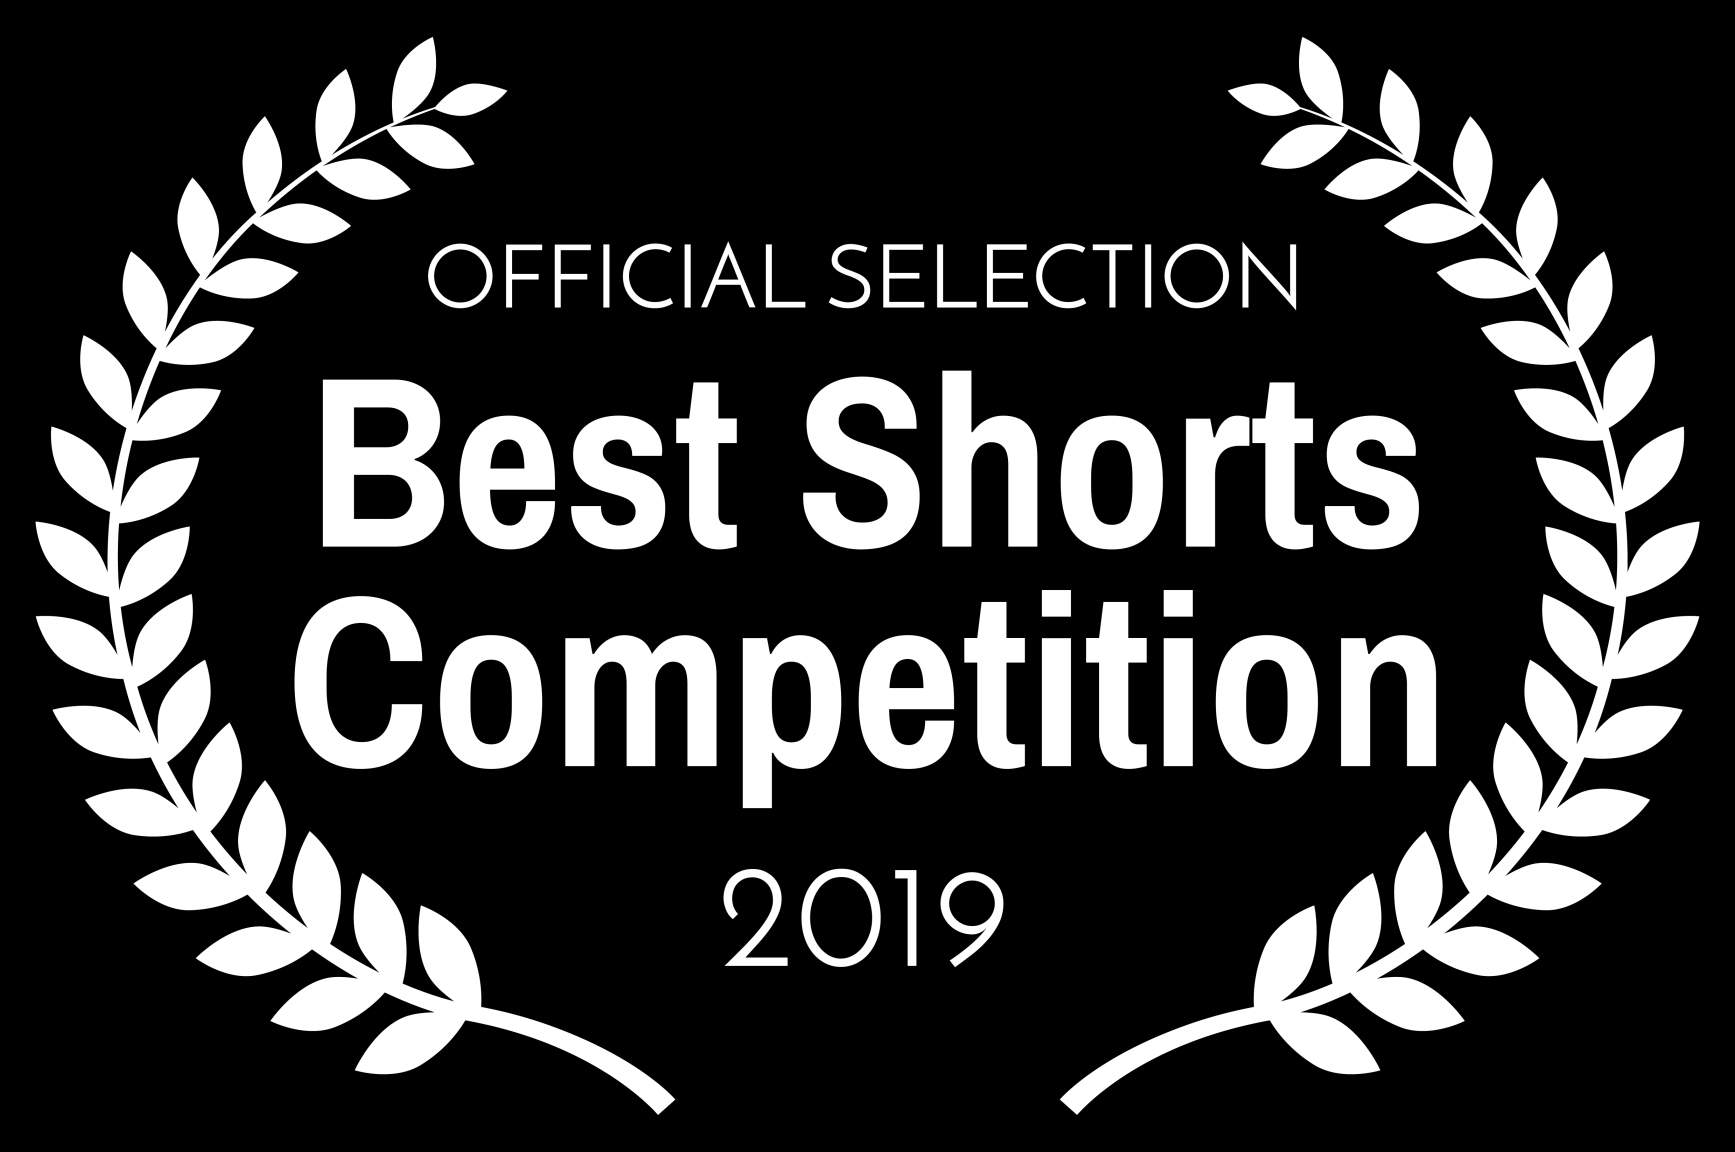 "Under the Whale" / Official Selection: Best Shorts Competition 2019